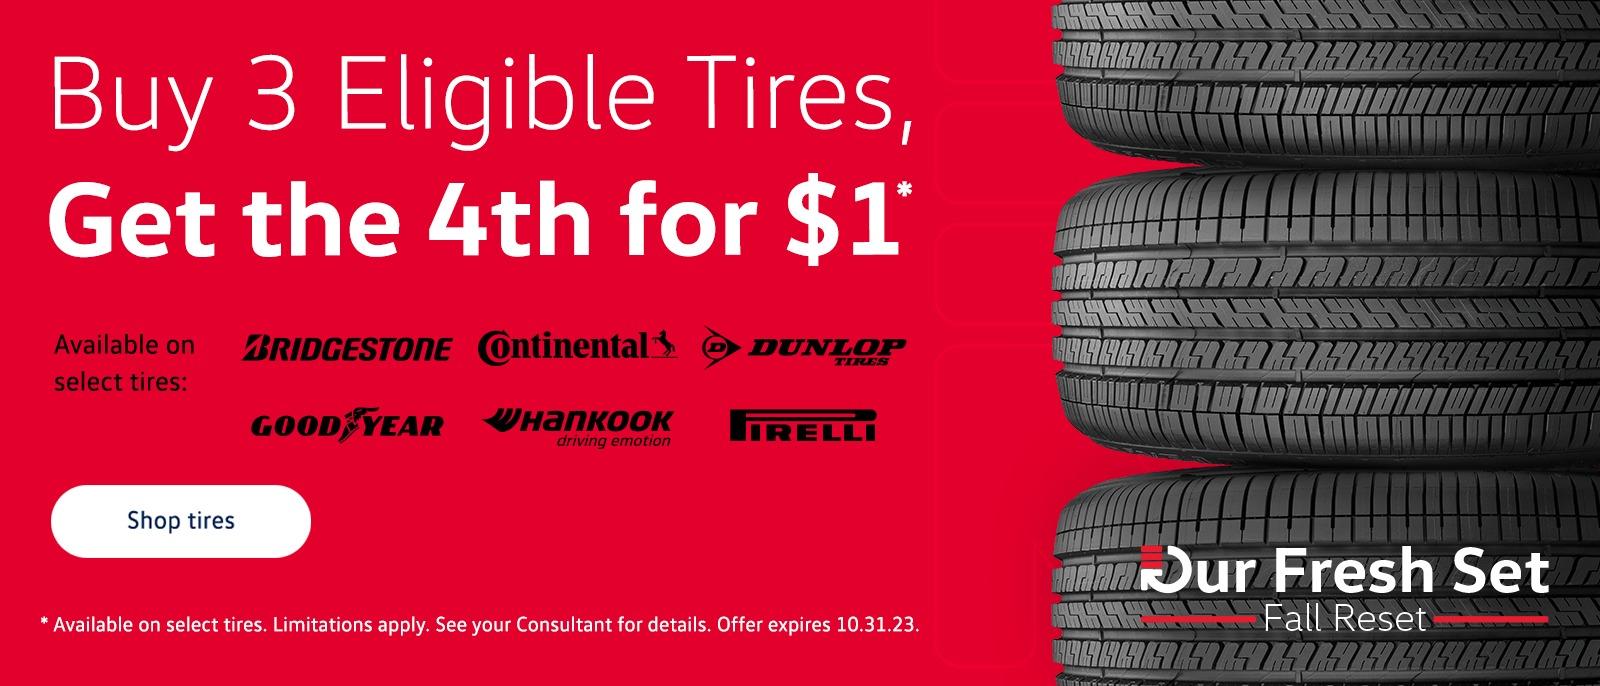 Buy 3 Eligible Tires, Get the 4th for $1*